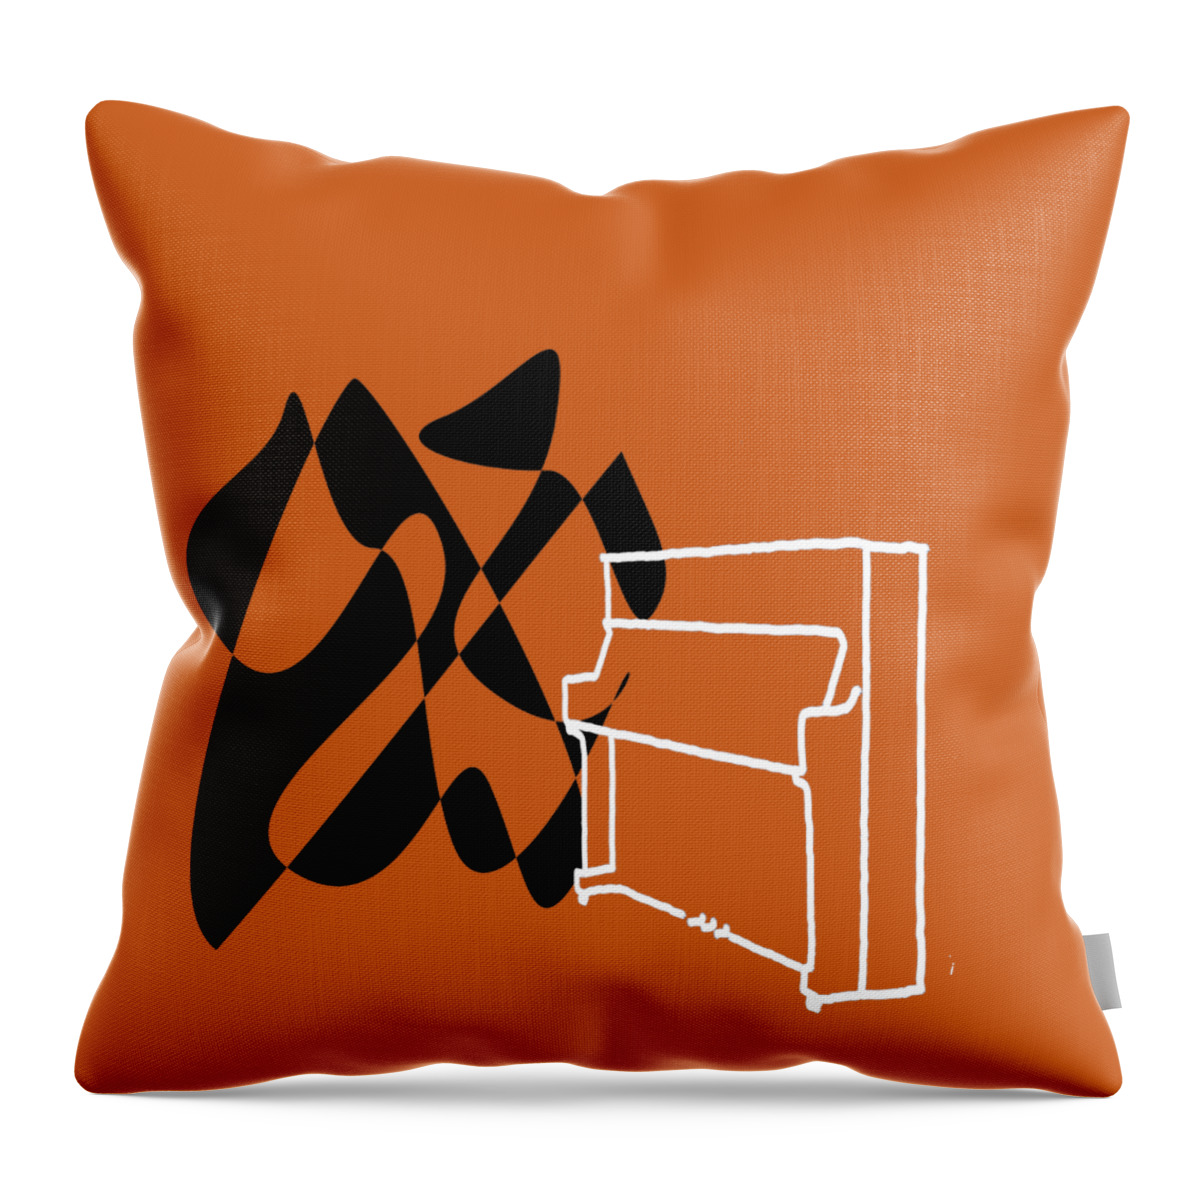 Piano Lessons Throw Pillow featuring the digital art Upright Piano in Orange by David Bridburg